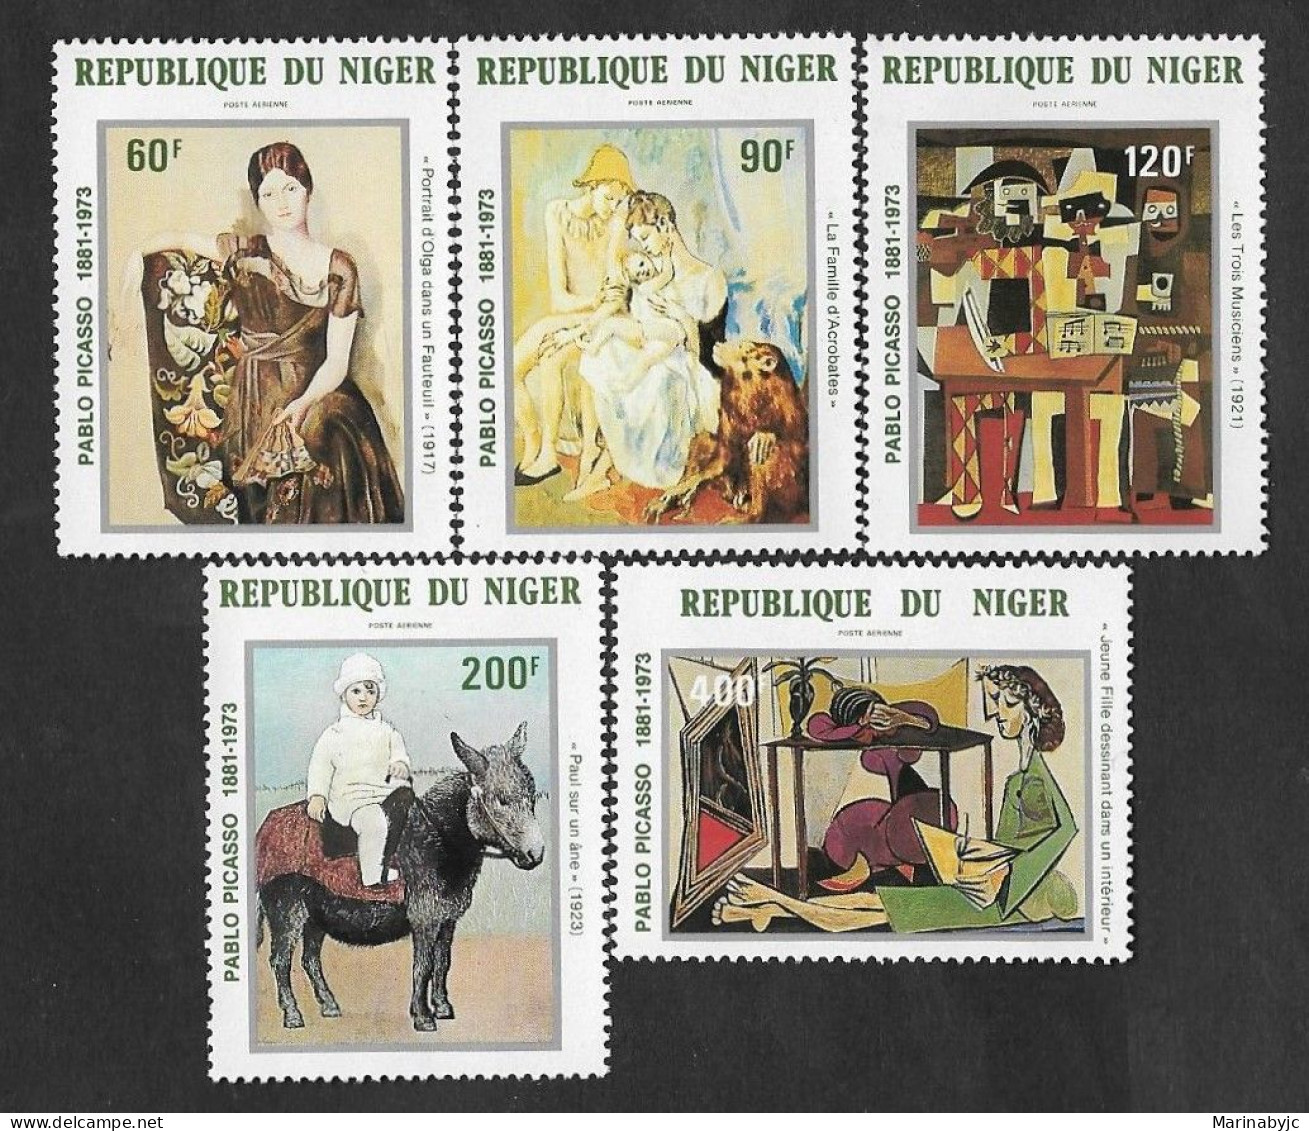 SD)1981 NIGER COMPLETE SERIES OF ART, PAINTING. CENTENARY OF THE BIRTH OF PABLO RUÍZ PICASSO, 1881 - 1973, 5 STAMPS MNH - Niger (1960-...)